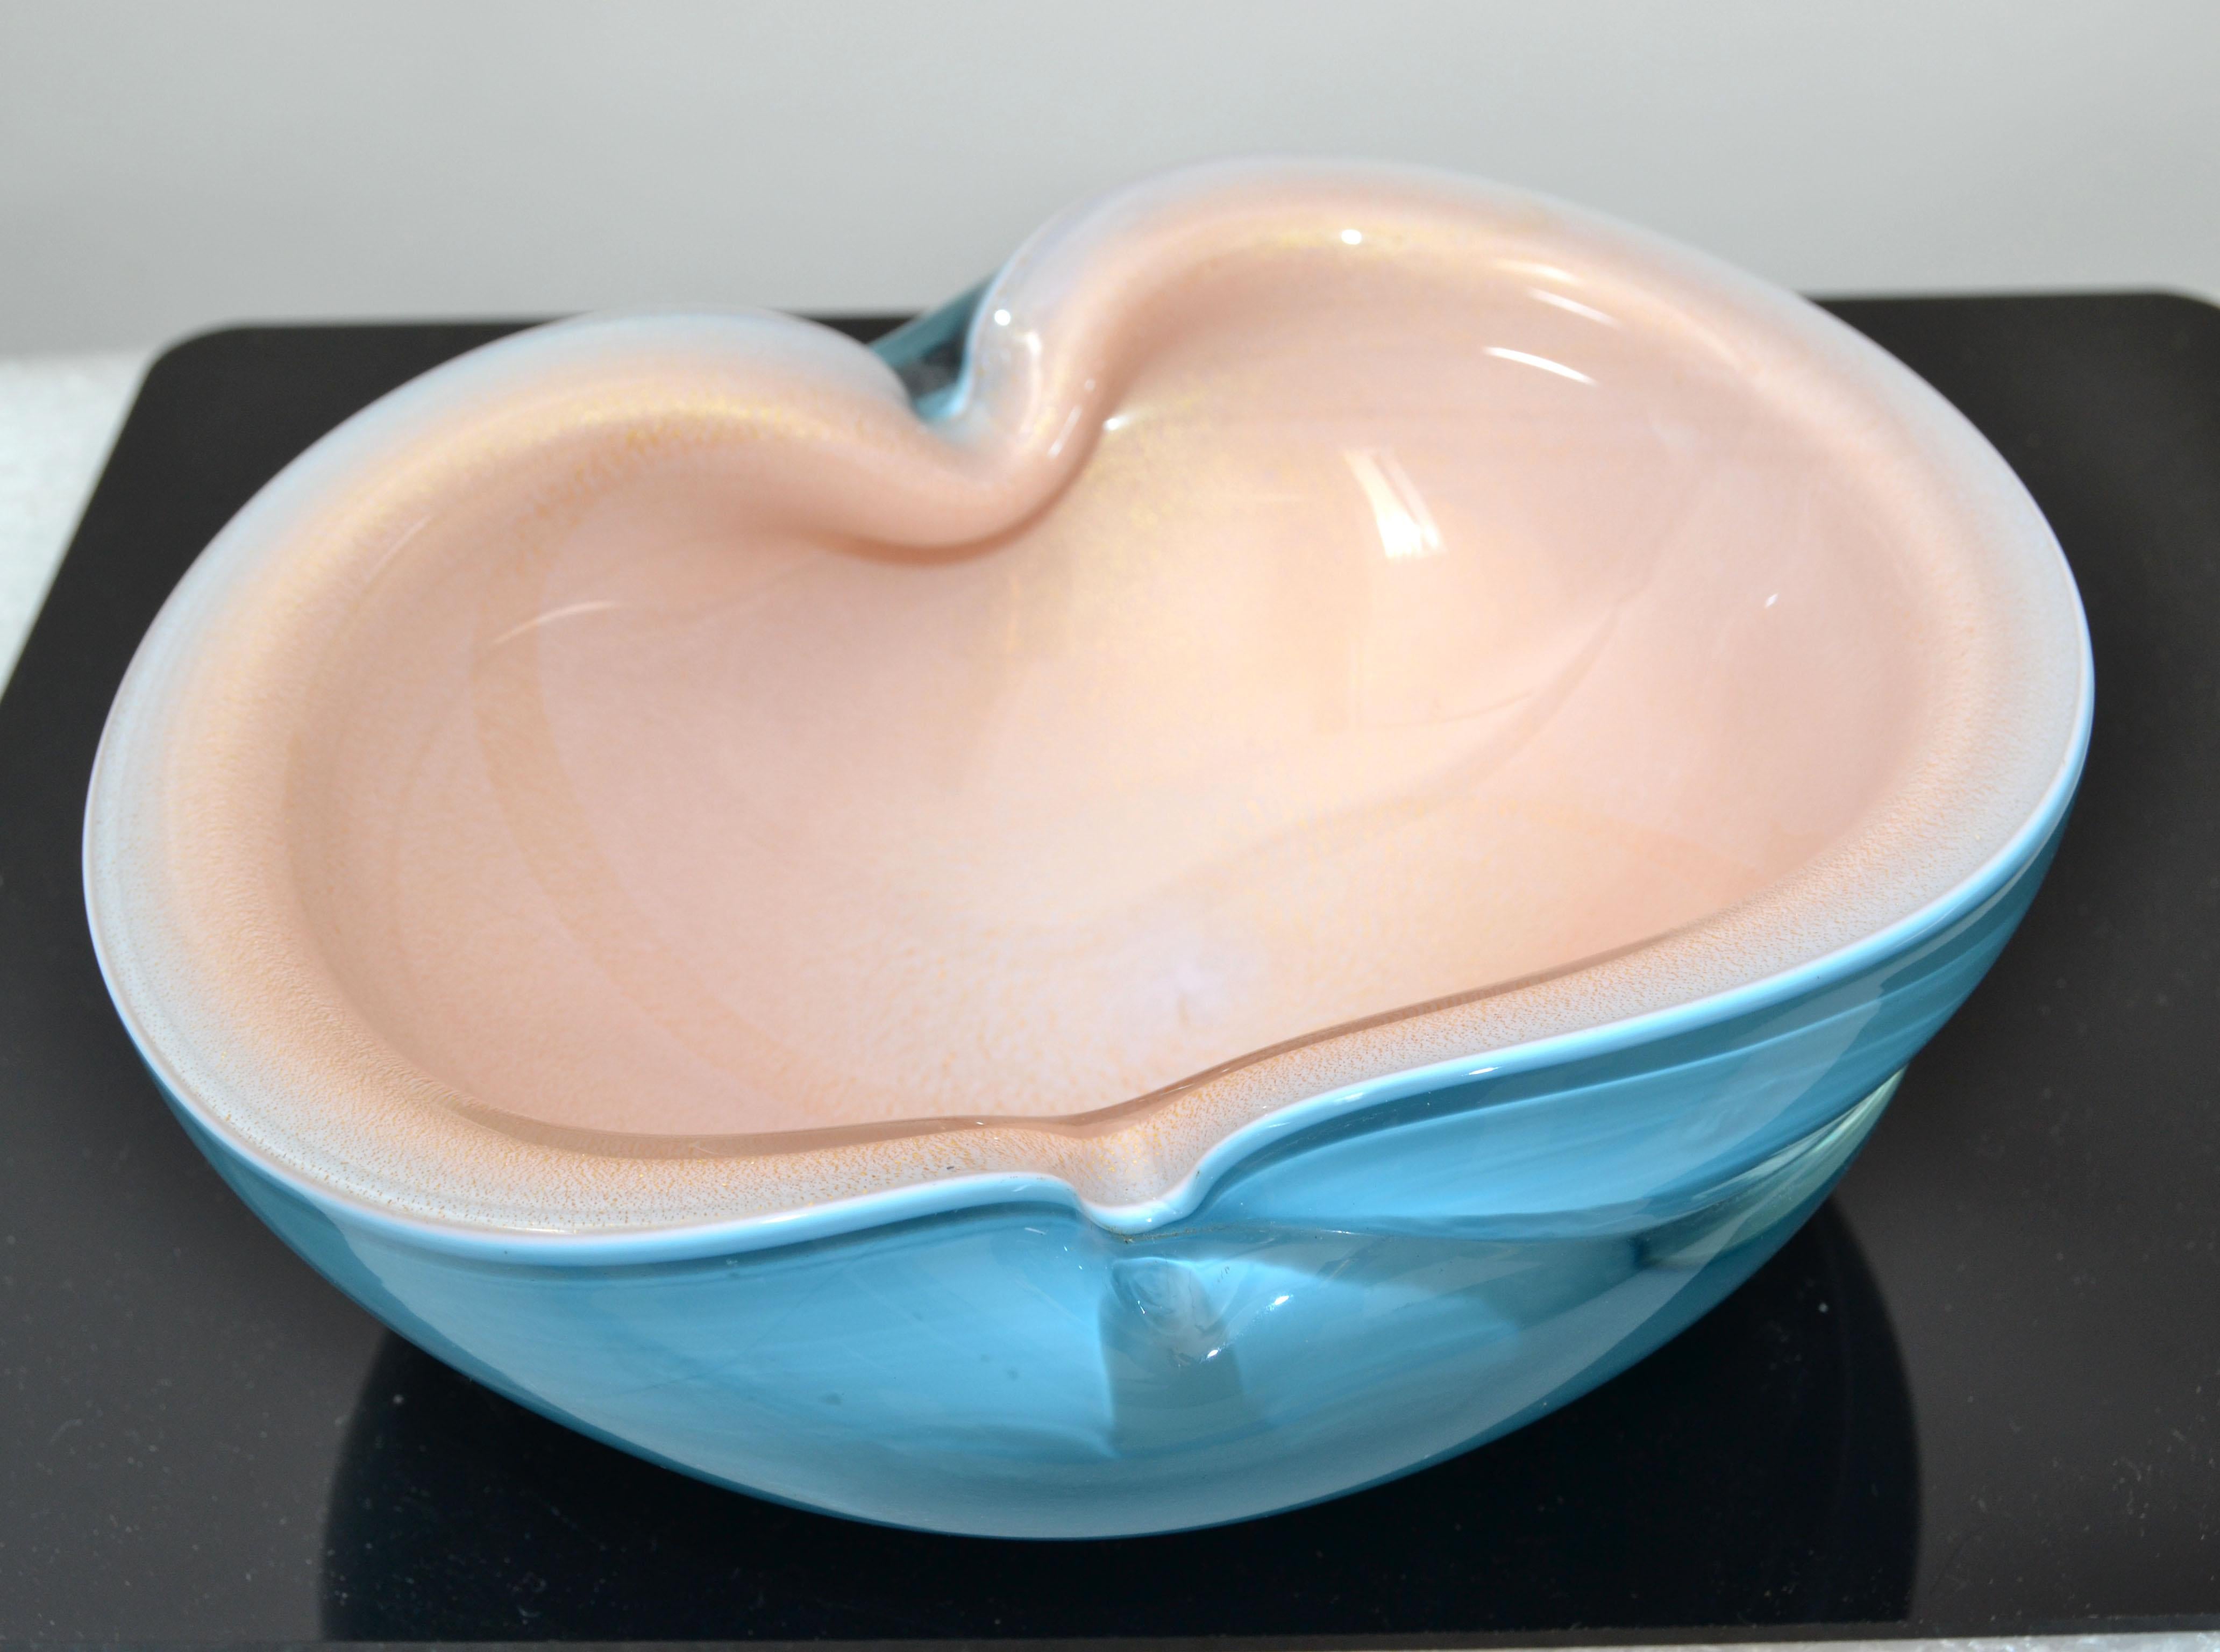 1960 Murano blown art glass bowl in turquoise blue, Gold dusted peach & Clear glass made in Italy.
Mid-Century Modern triple cased unique glass art very elegant and practical.